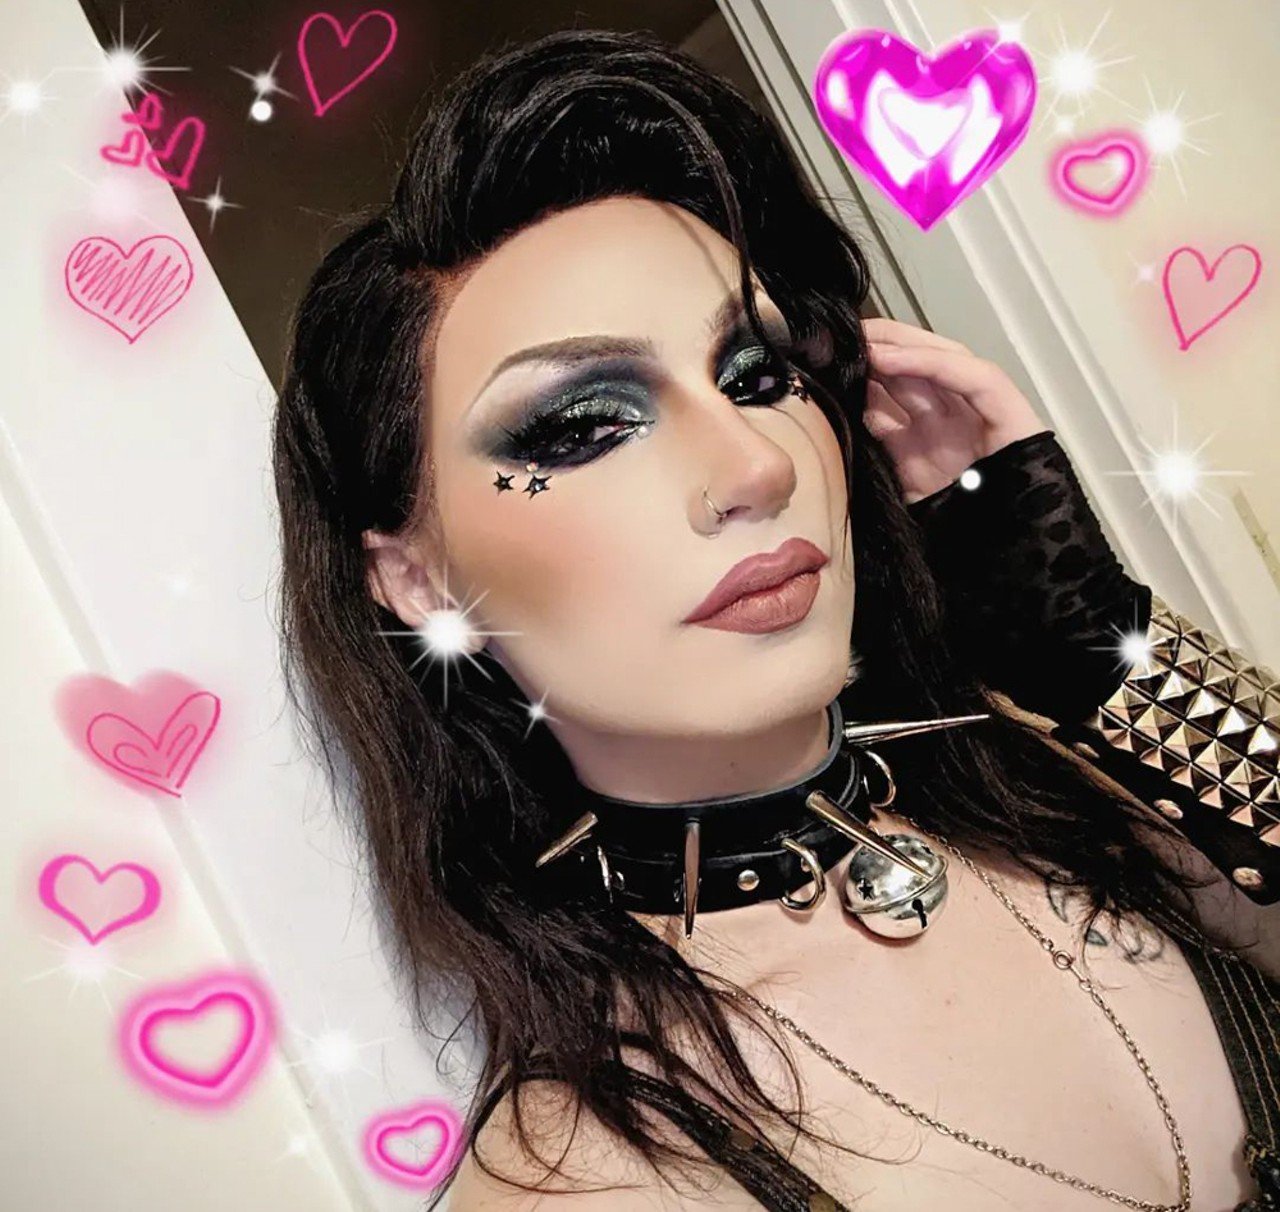  Lyra So Naughty
@lyra.so.naughty
This drag queen is also a scene queen: she loves emo/goth/pop-punk looks.
Photo via lyra.so.naughty
/Instagram